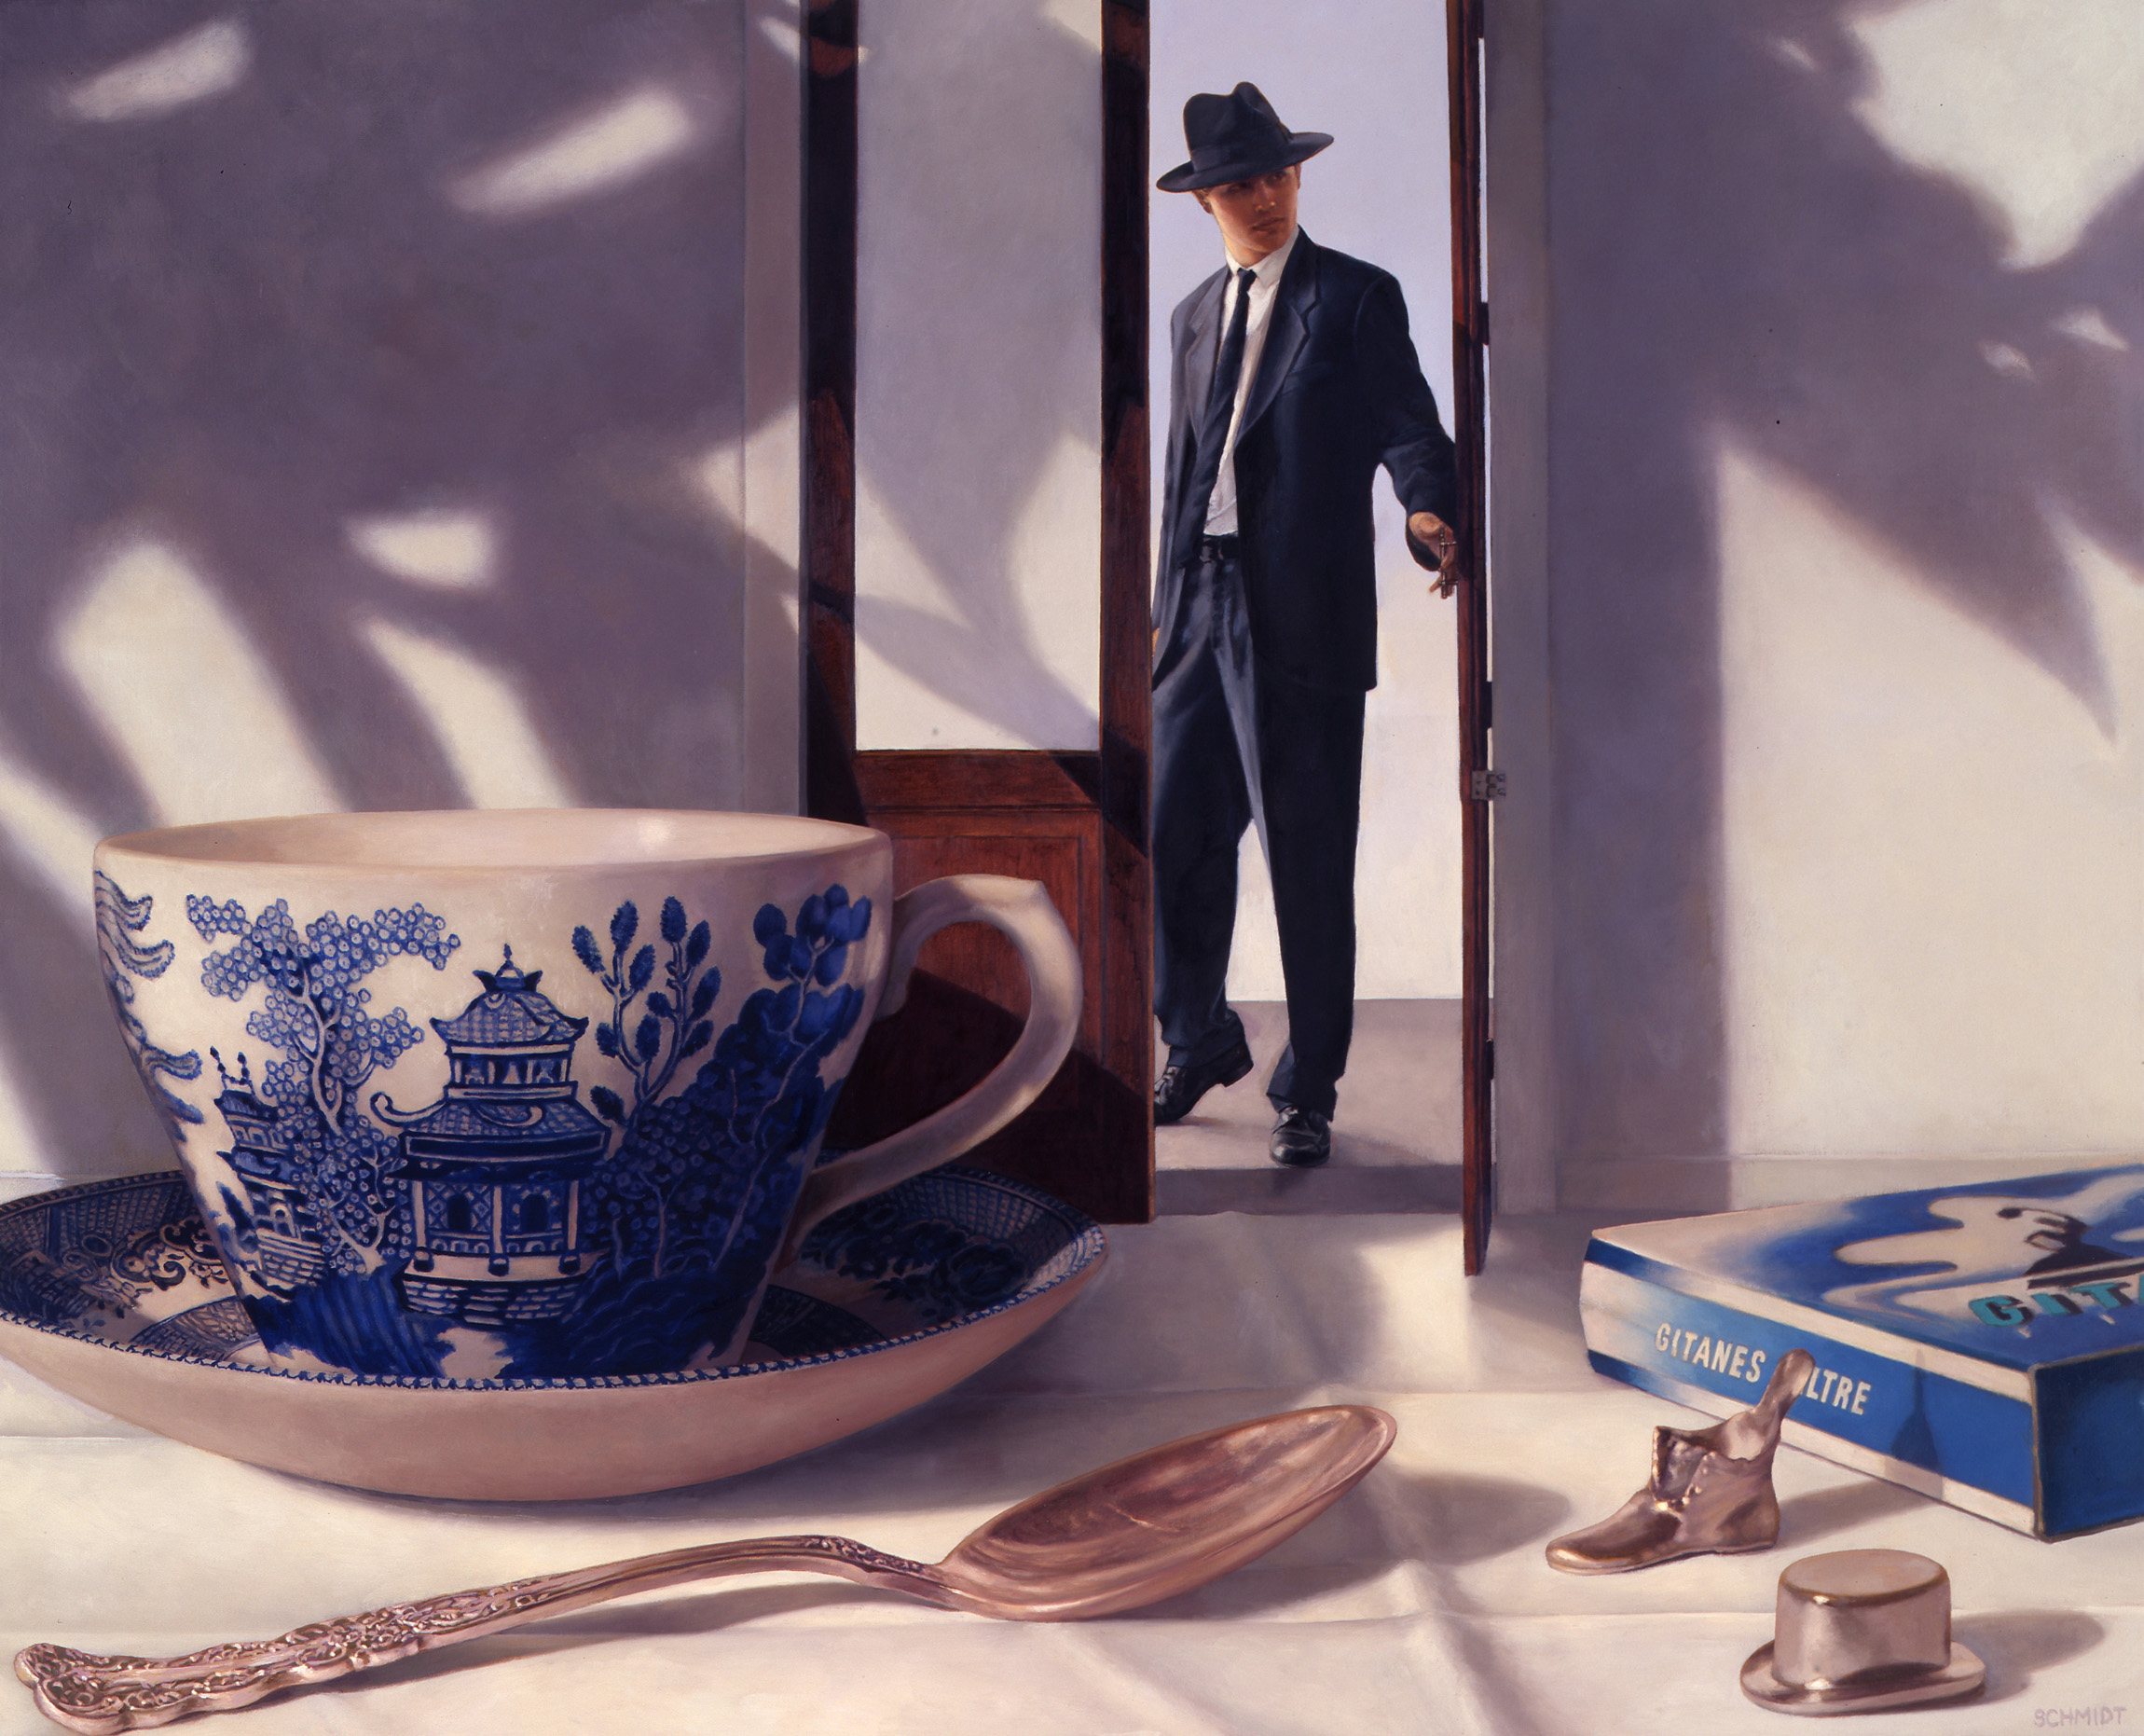 Giant blue willow pattern tea cup, male figure wearing suit and fedora hat (Patricio) standing in a doorway, giant Gitanes cigarette pack, giant antique silver spoon, monopoly metal playing pieces, shoe and hat